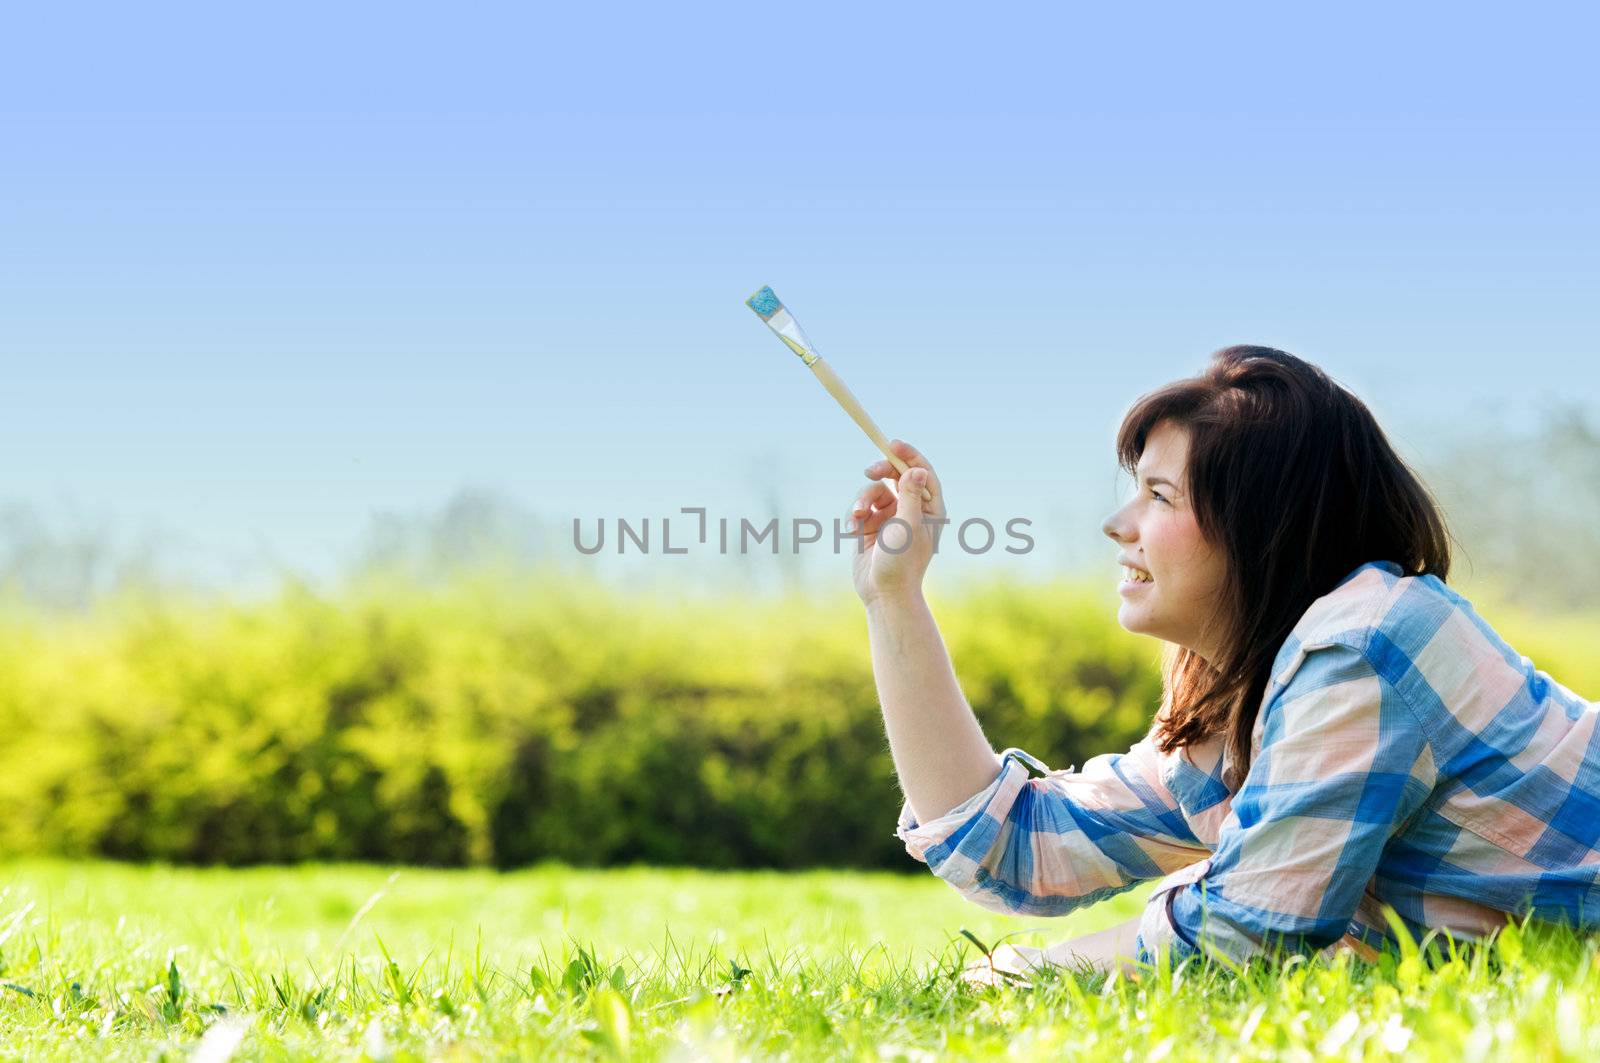 Painting the world. Smiling girl on grass with a paintbrush